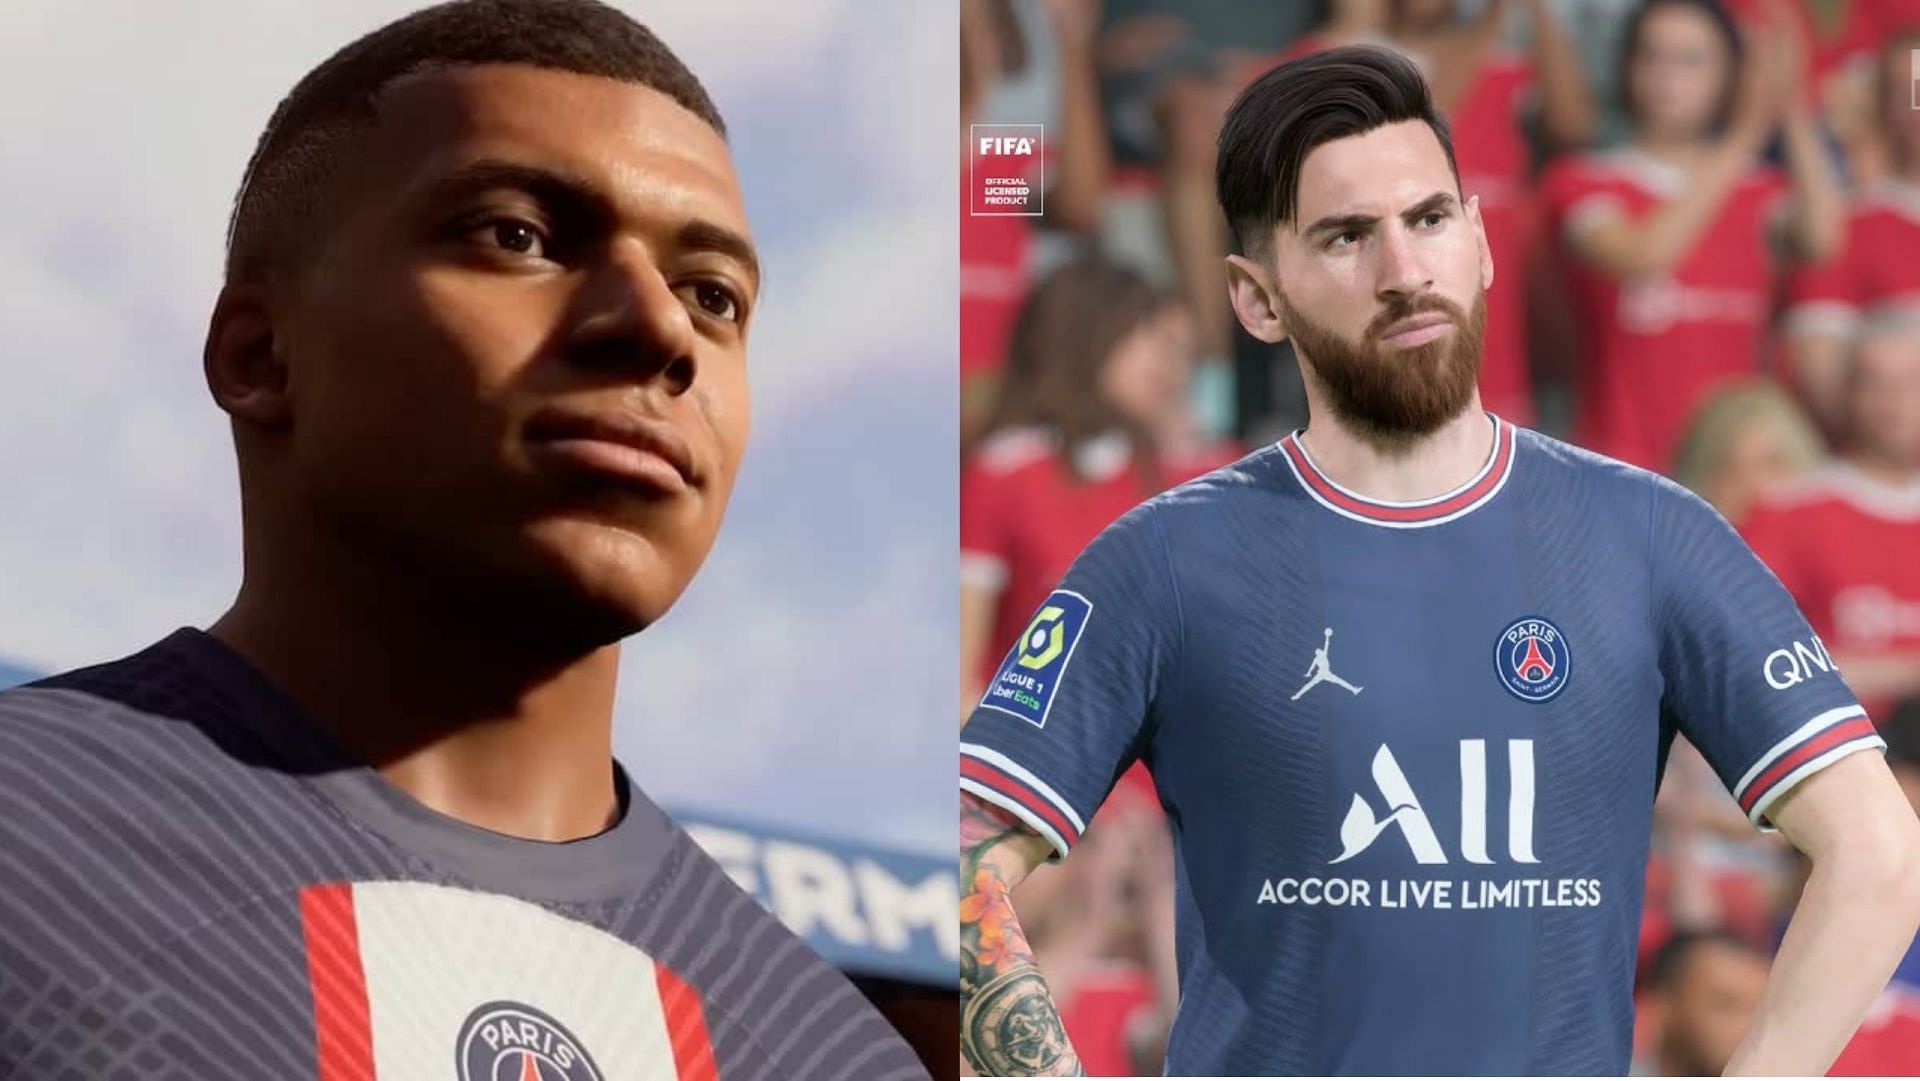 Both Messi and Mbappe are among the top 3 dribblers in the game (Images via EA sports)